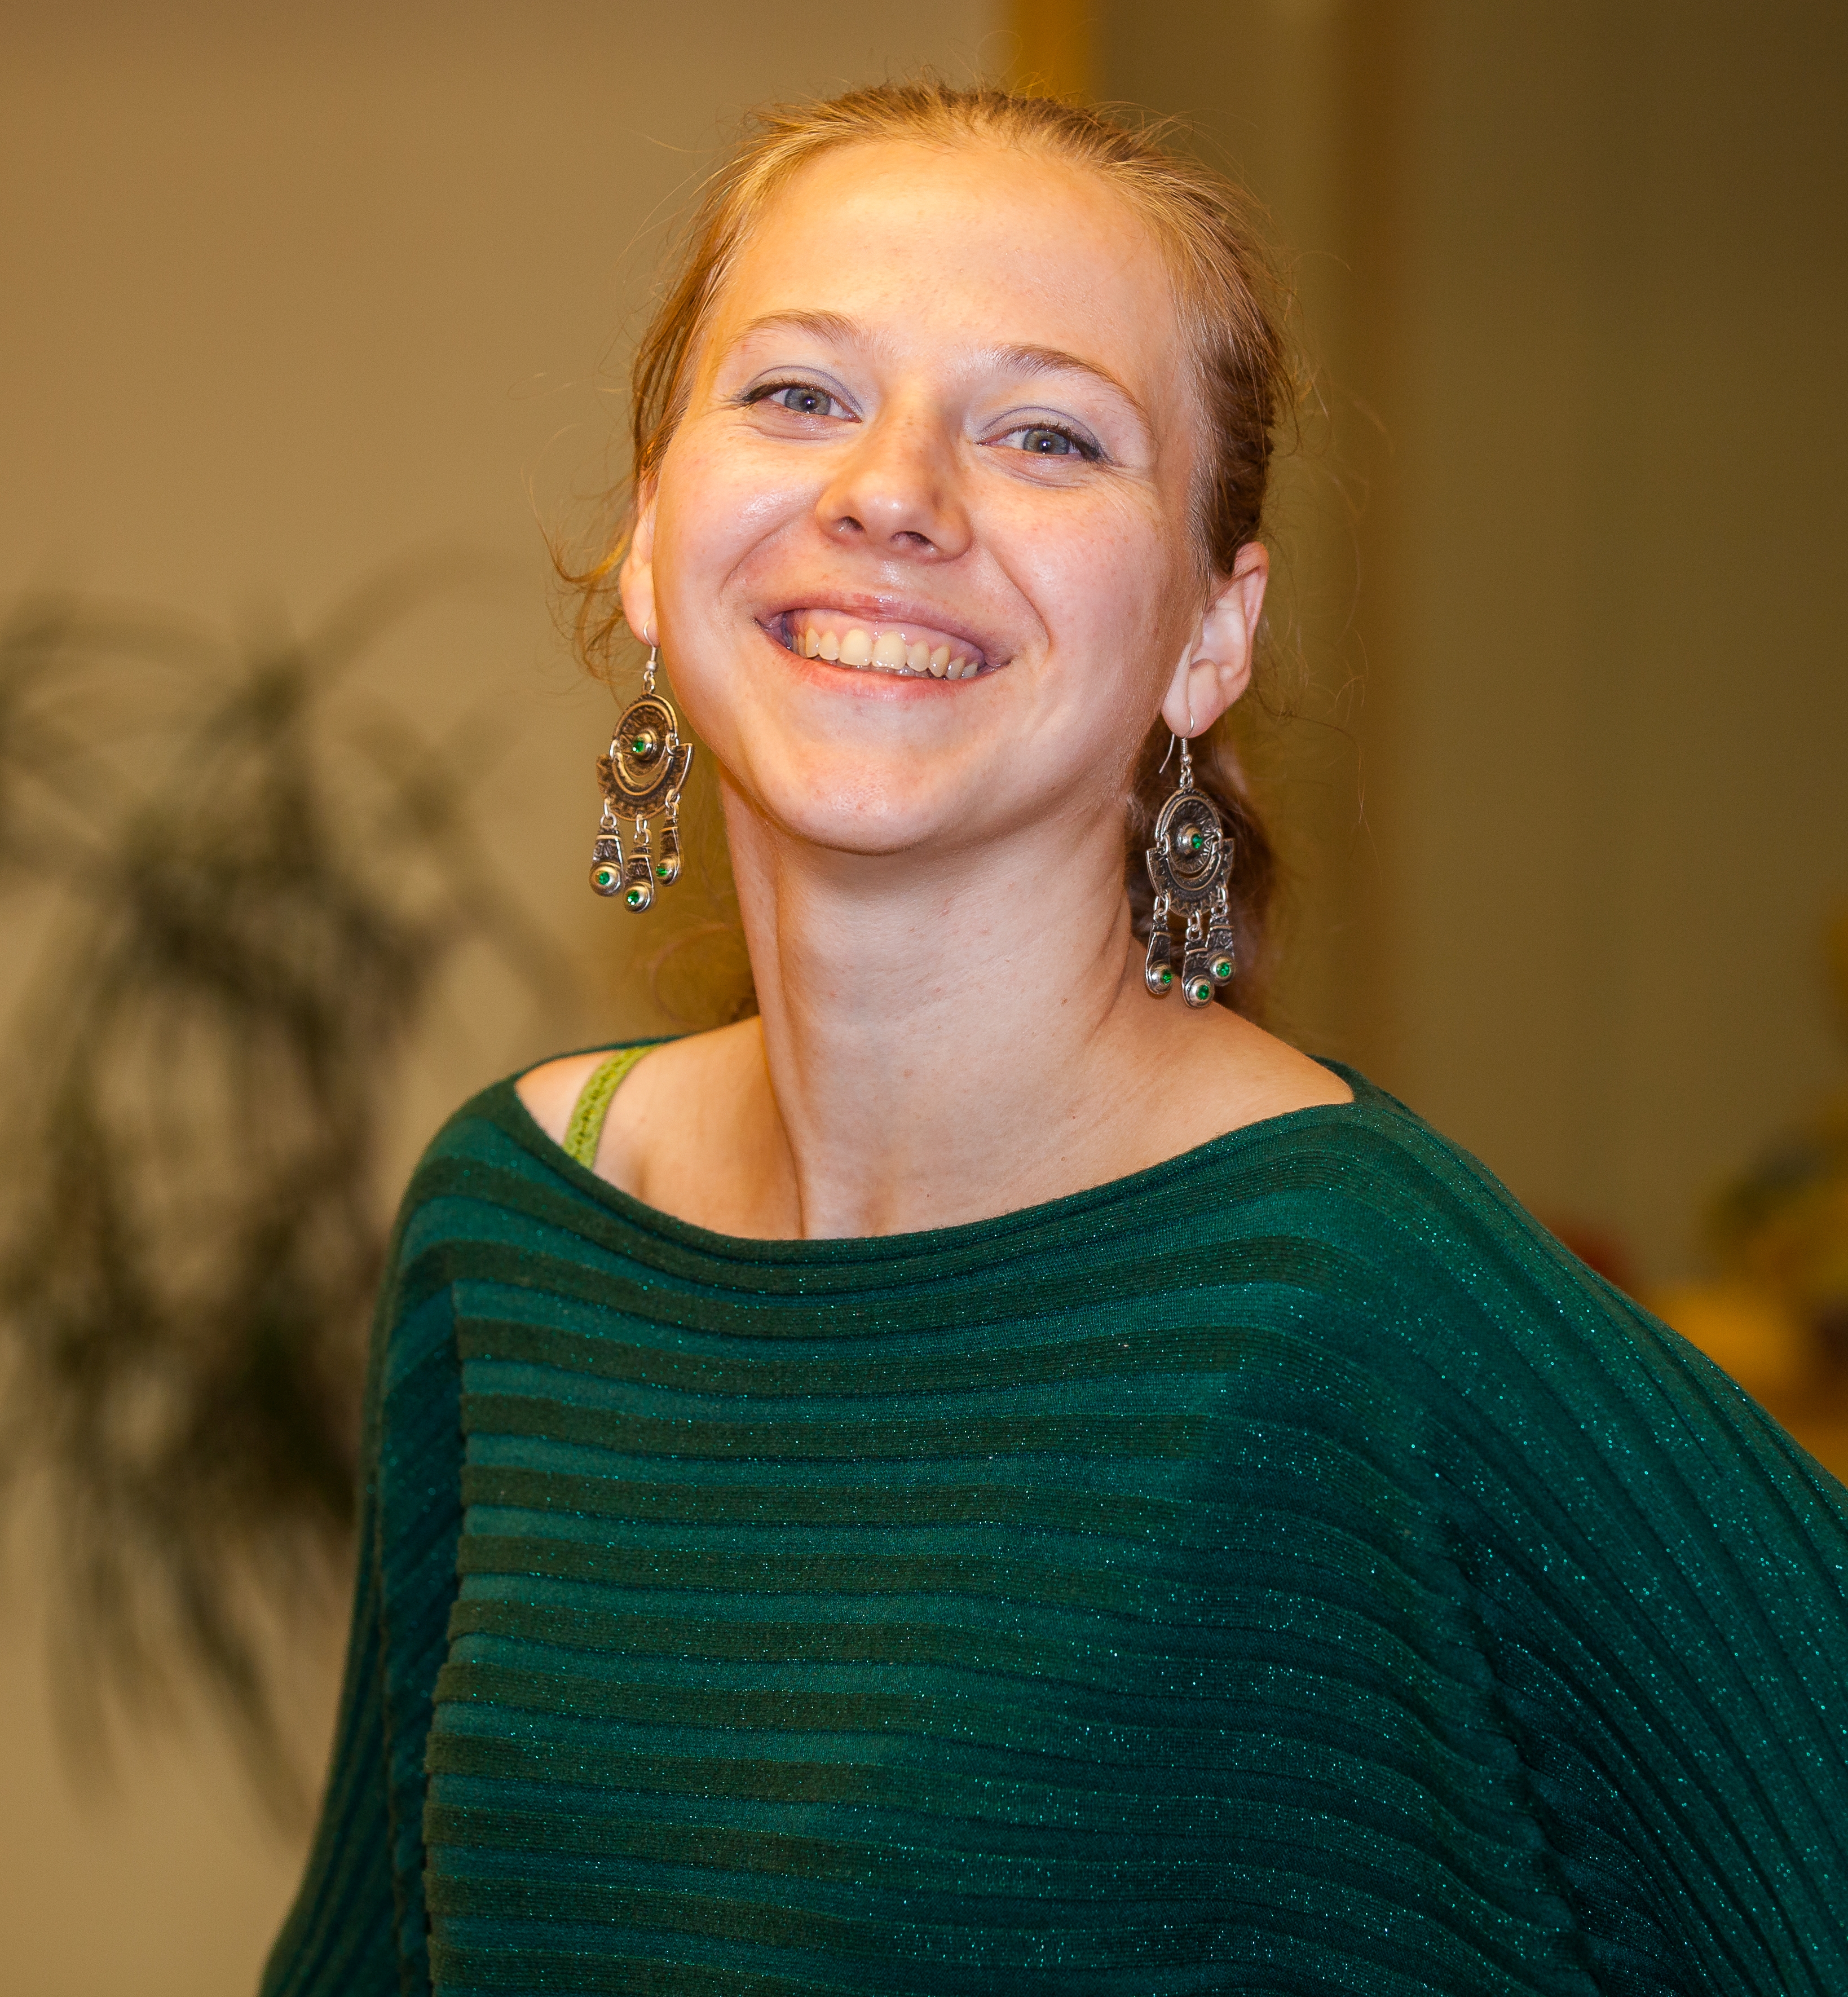 a fair-haired young smiling woman photographed in October 2013, picture 3/6